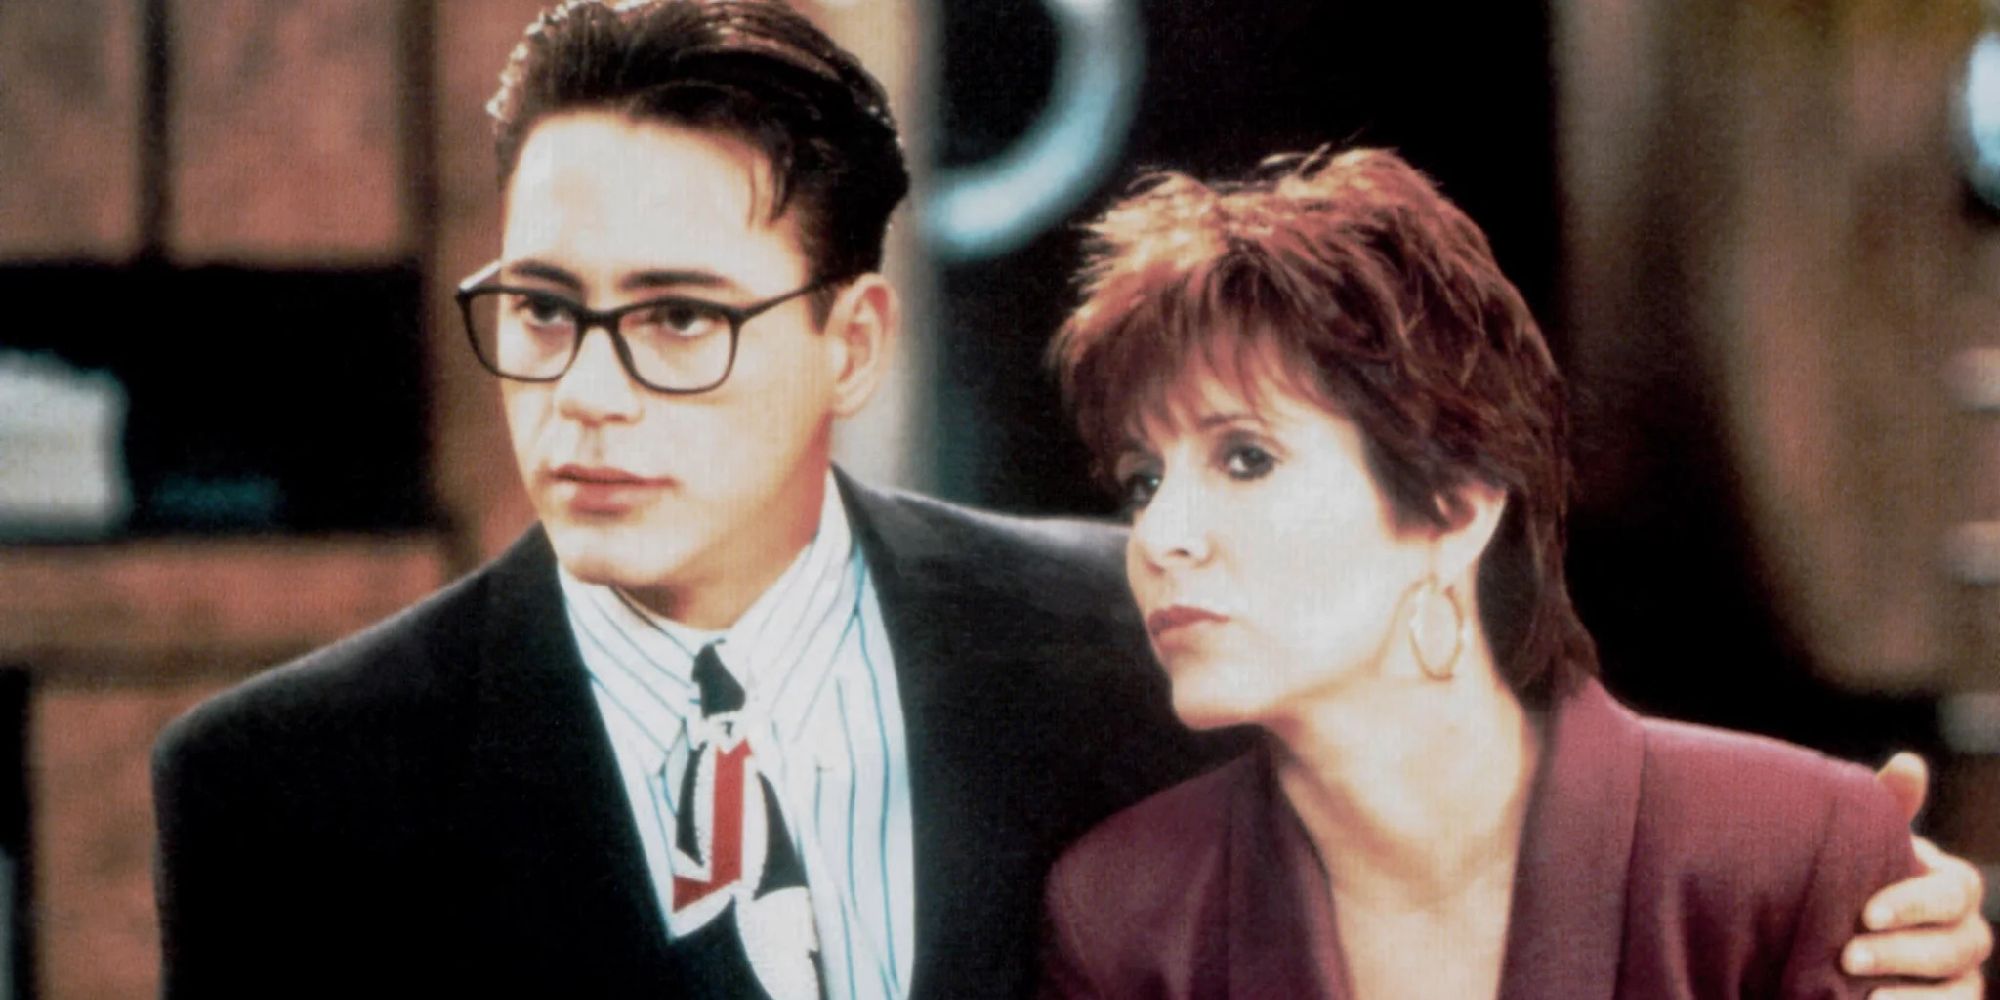 Robert Downey Jr. and Carrie Fisher in Soapdish